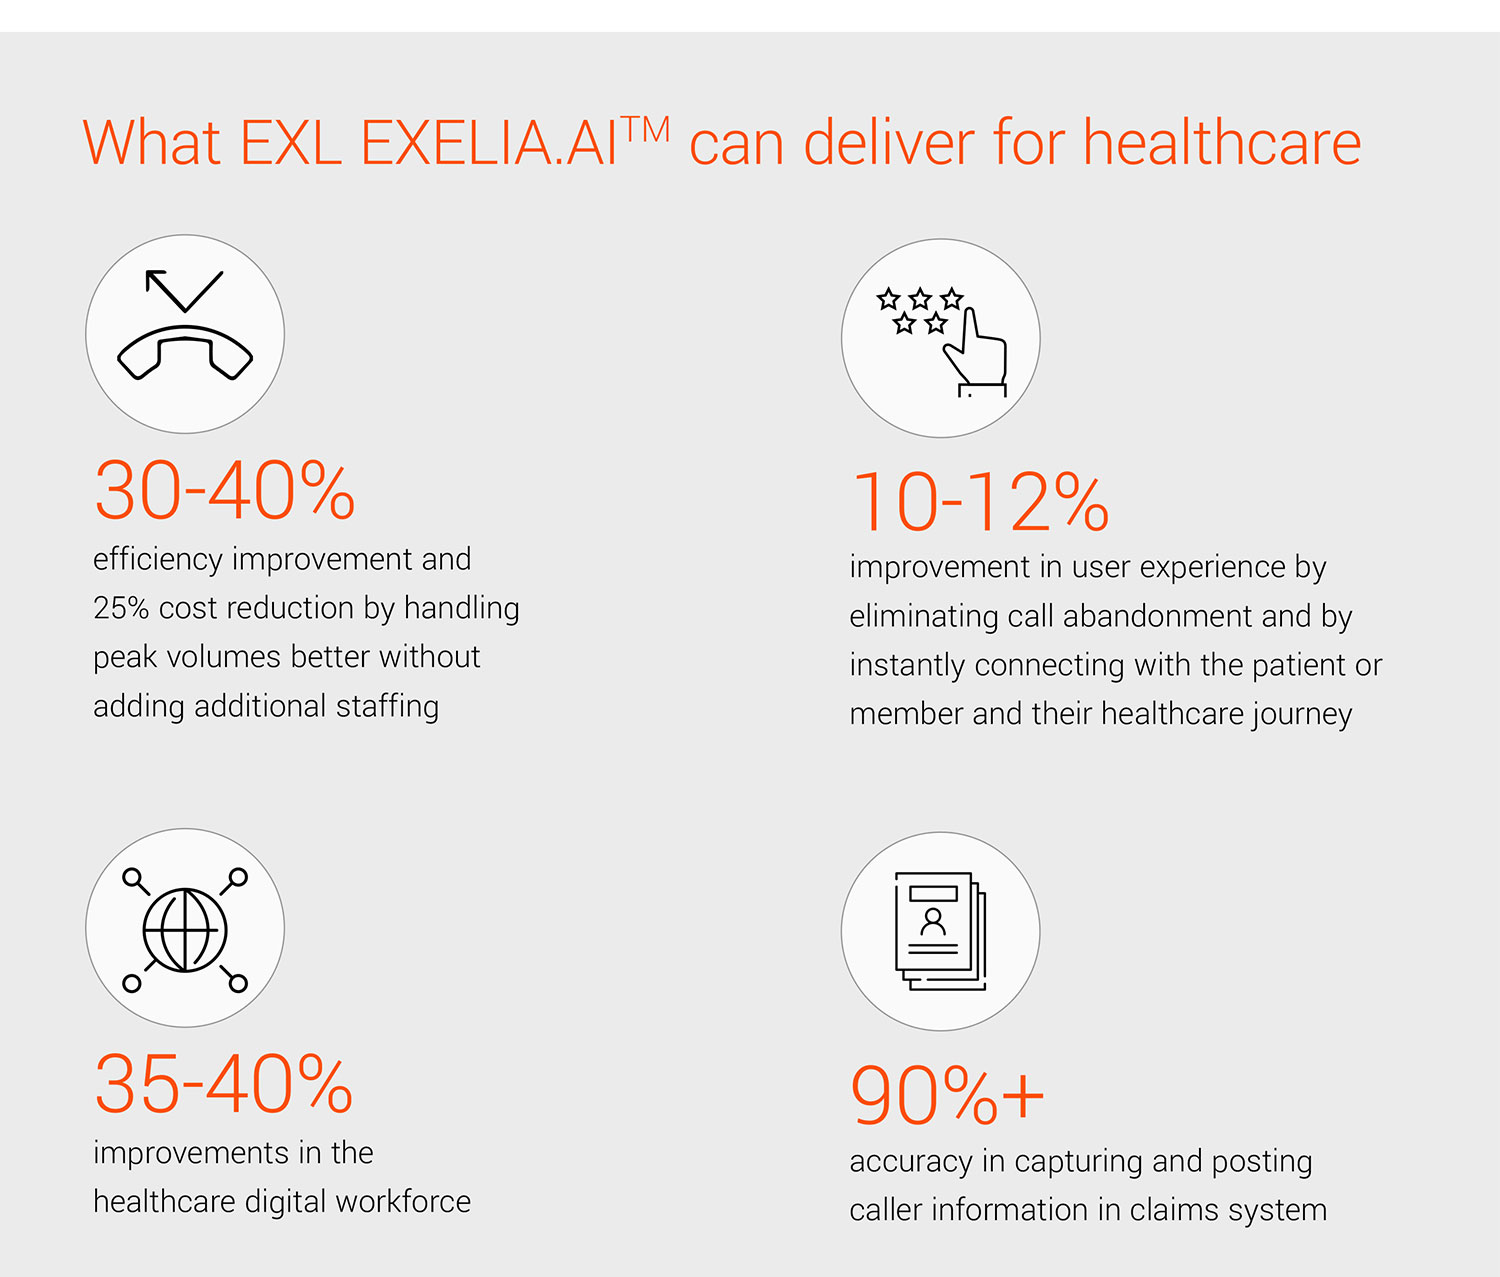 What EXL EXELIA.AI can deliver for healthcare